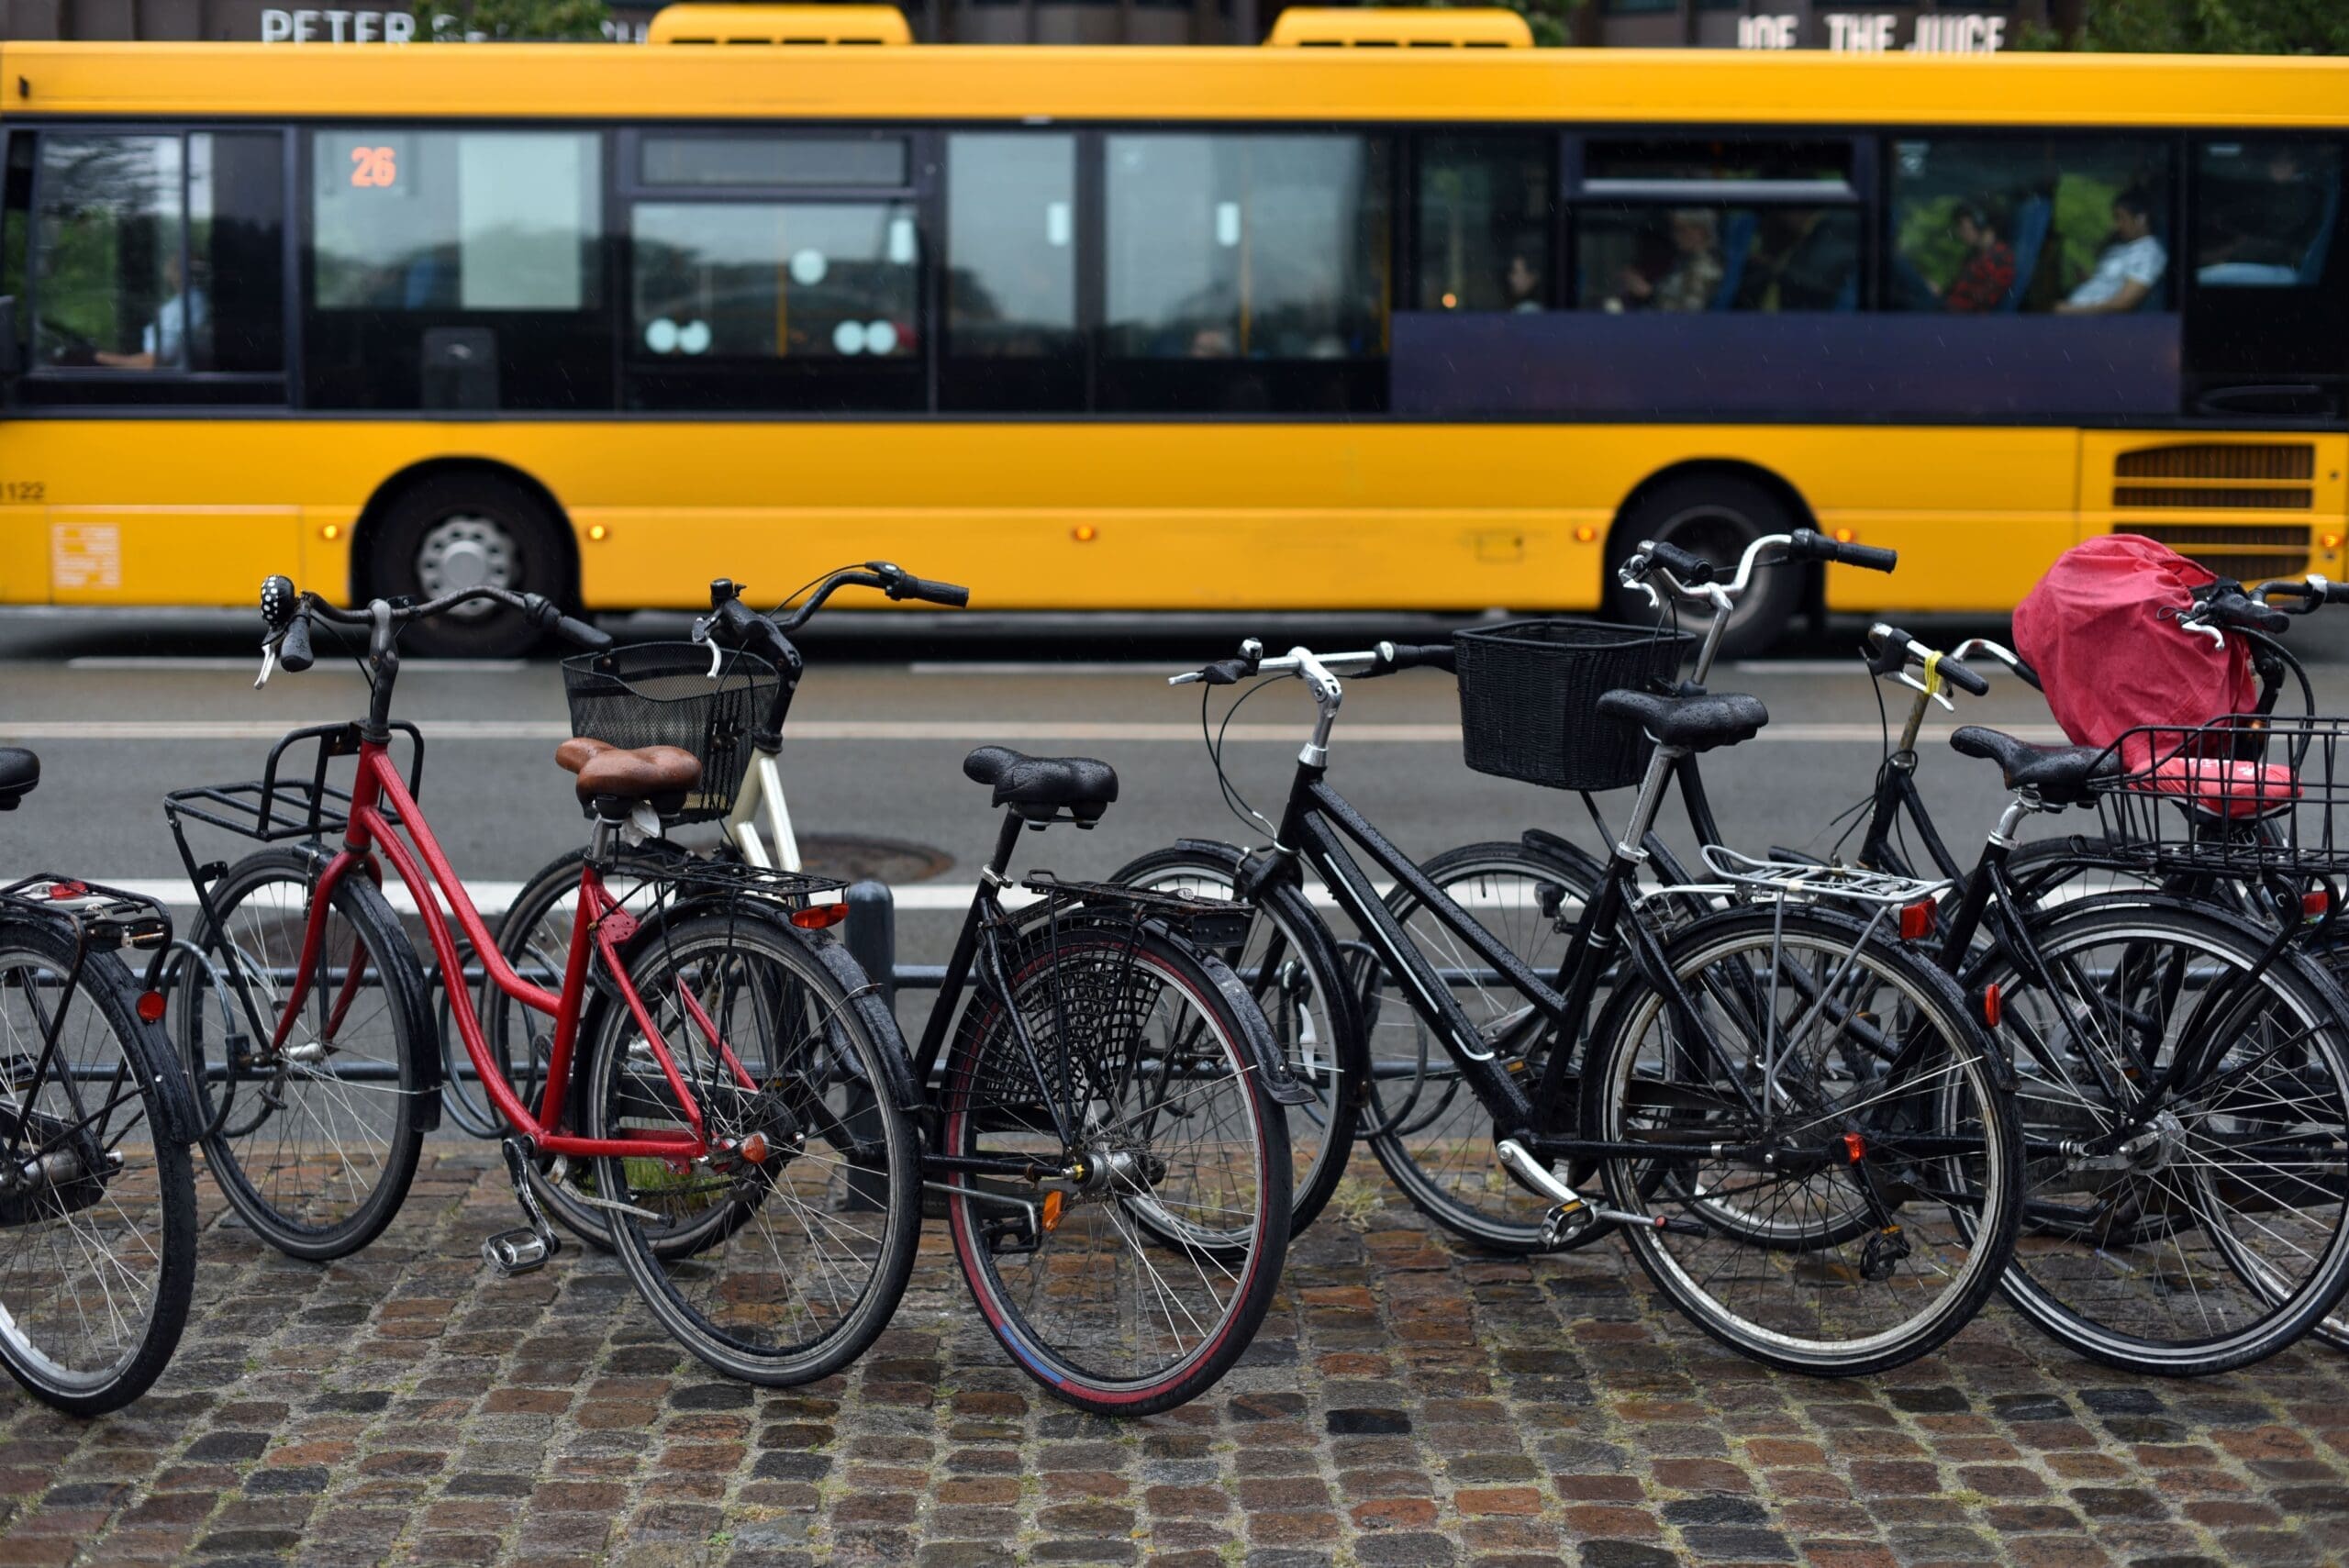 Parking,With,Bicycles,On,Background,Public,City,Transport